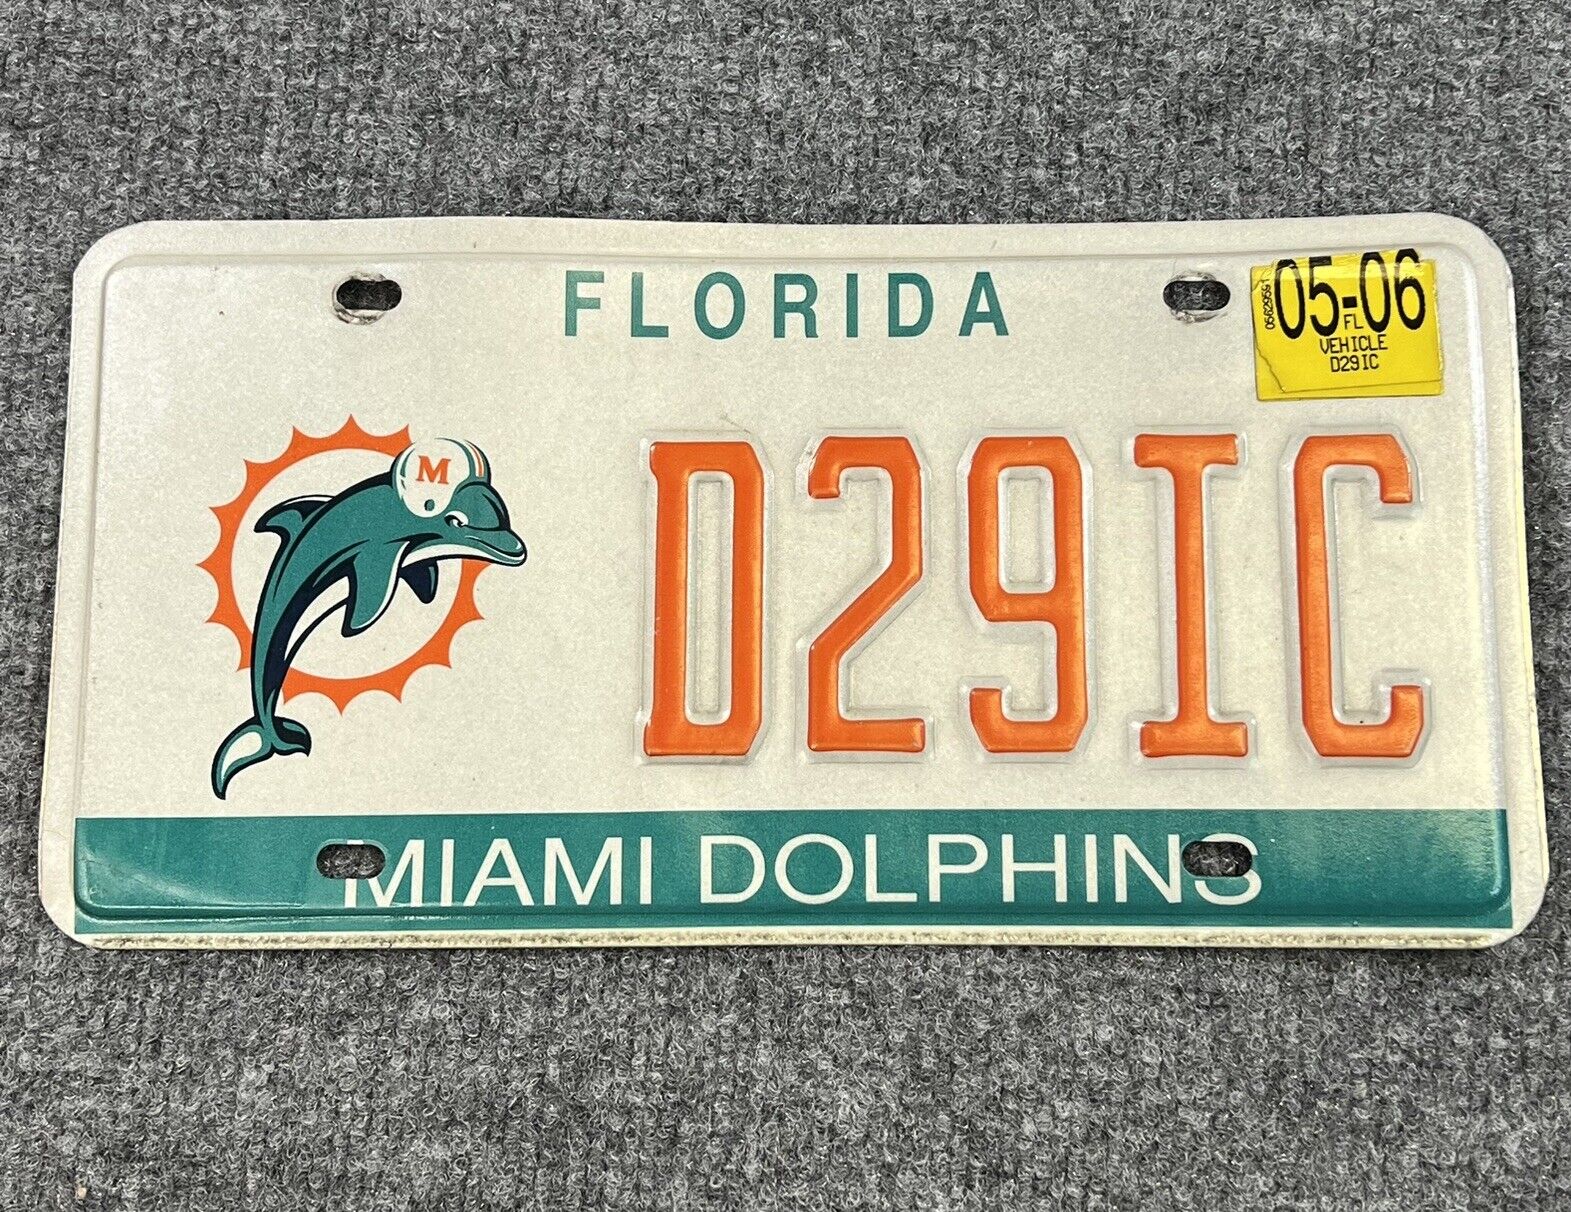 2006 Florida Miami Dolphins License Plate Tag Specialty D29IC NFL Football